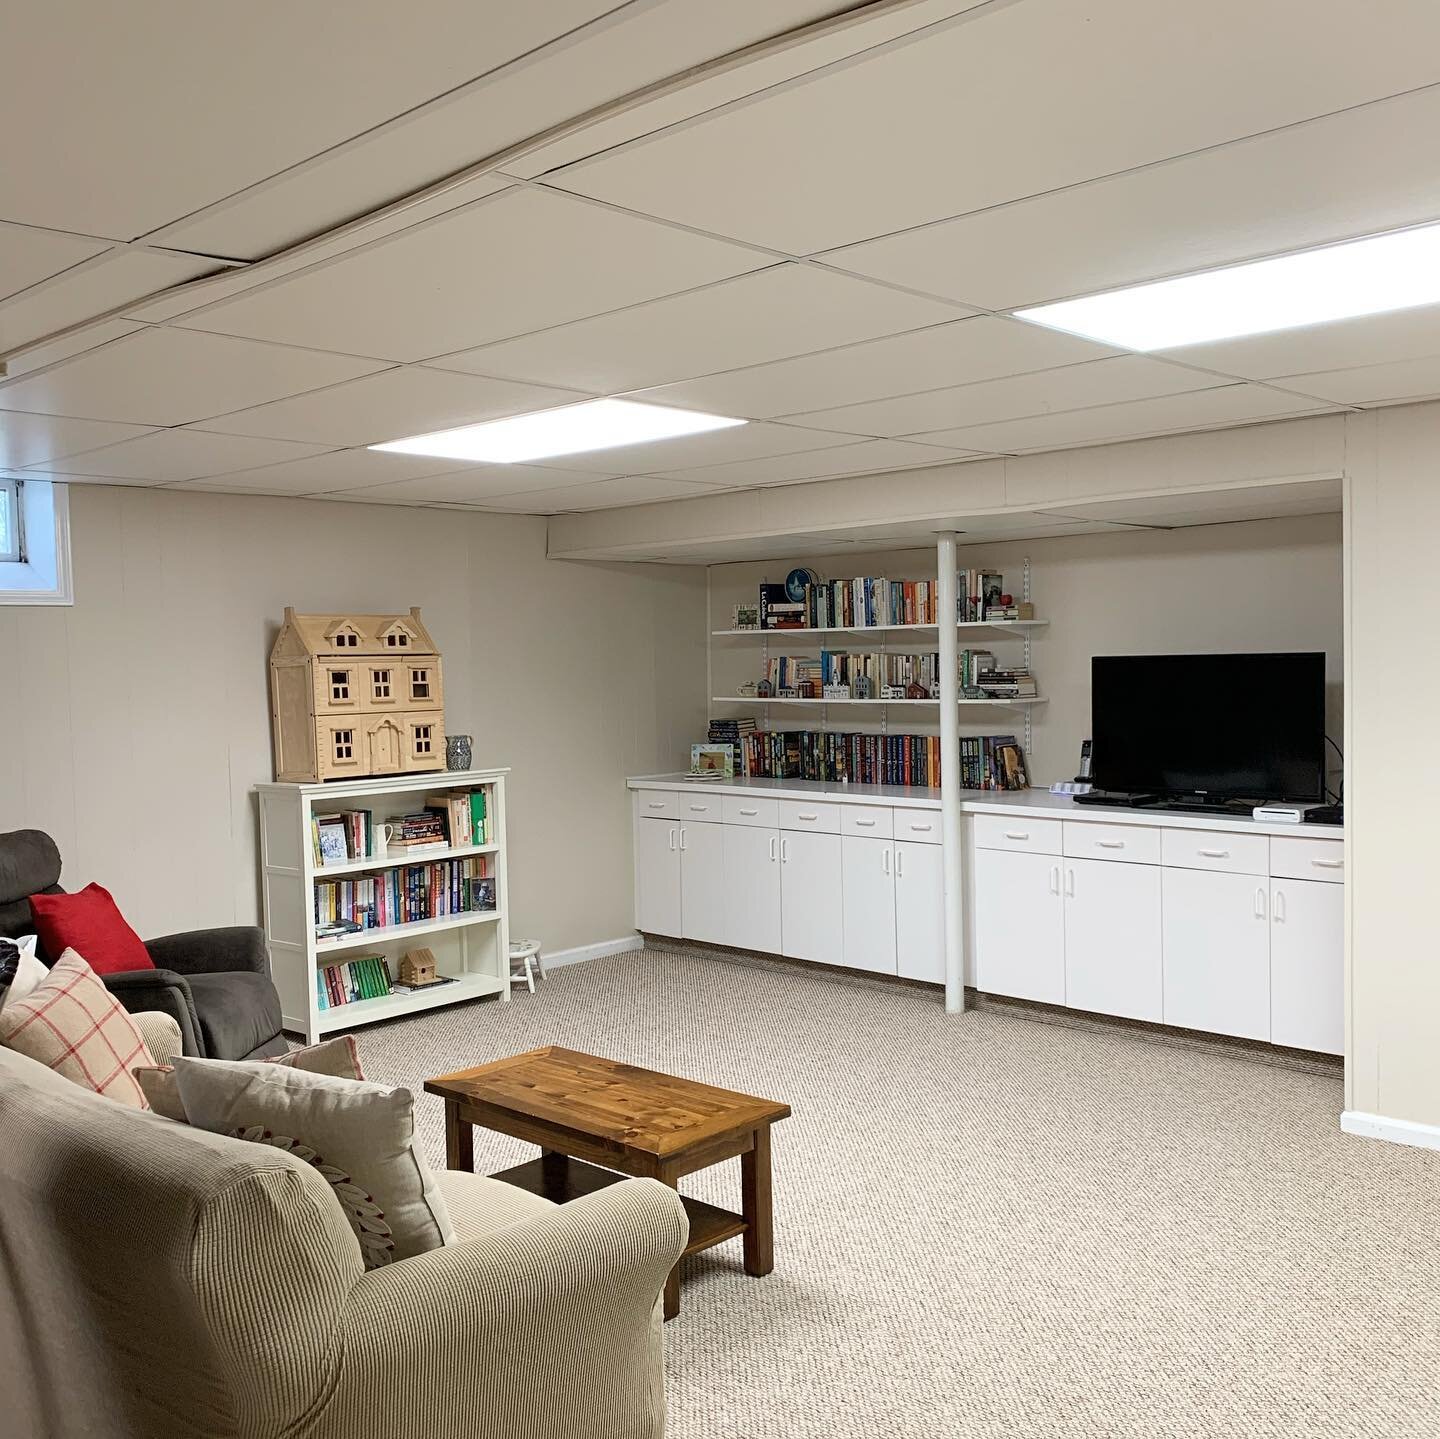 My client and I completely transformed all parts of this finished basement!

I love giving spaces back their purpose and we did just that. I was so lucky to work with this family who not only helped with a lot of the heavy lifting, but shared often h